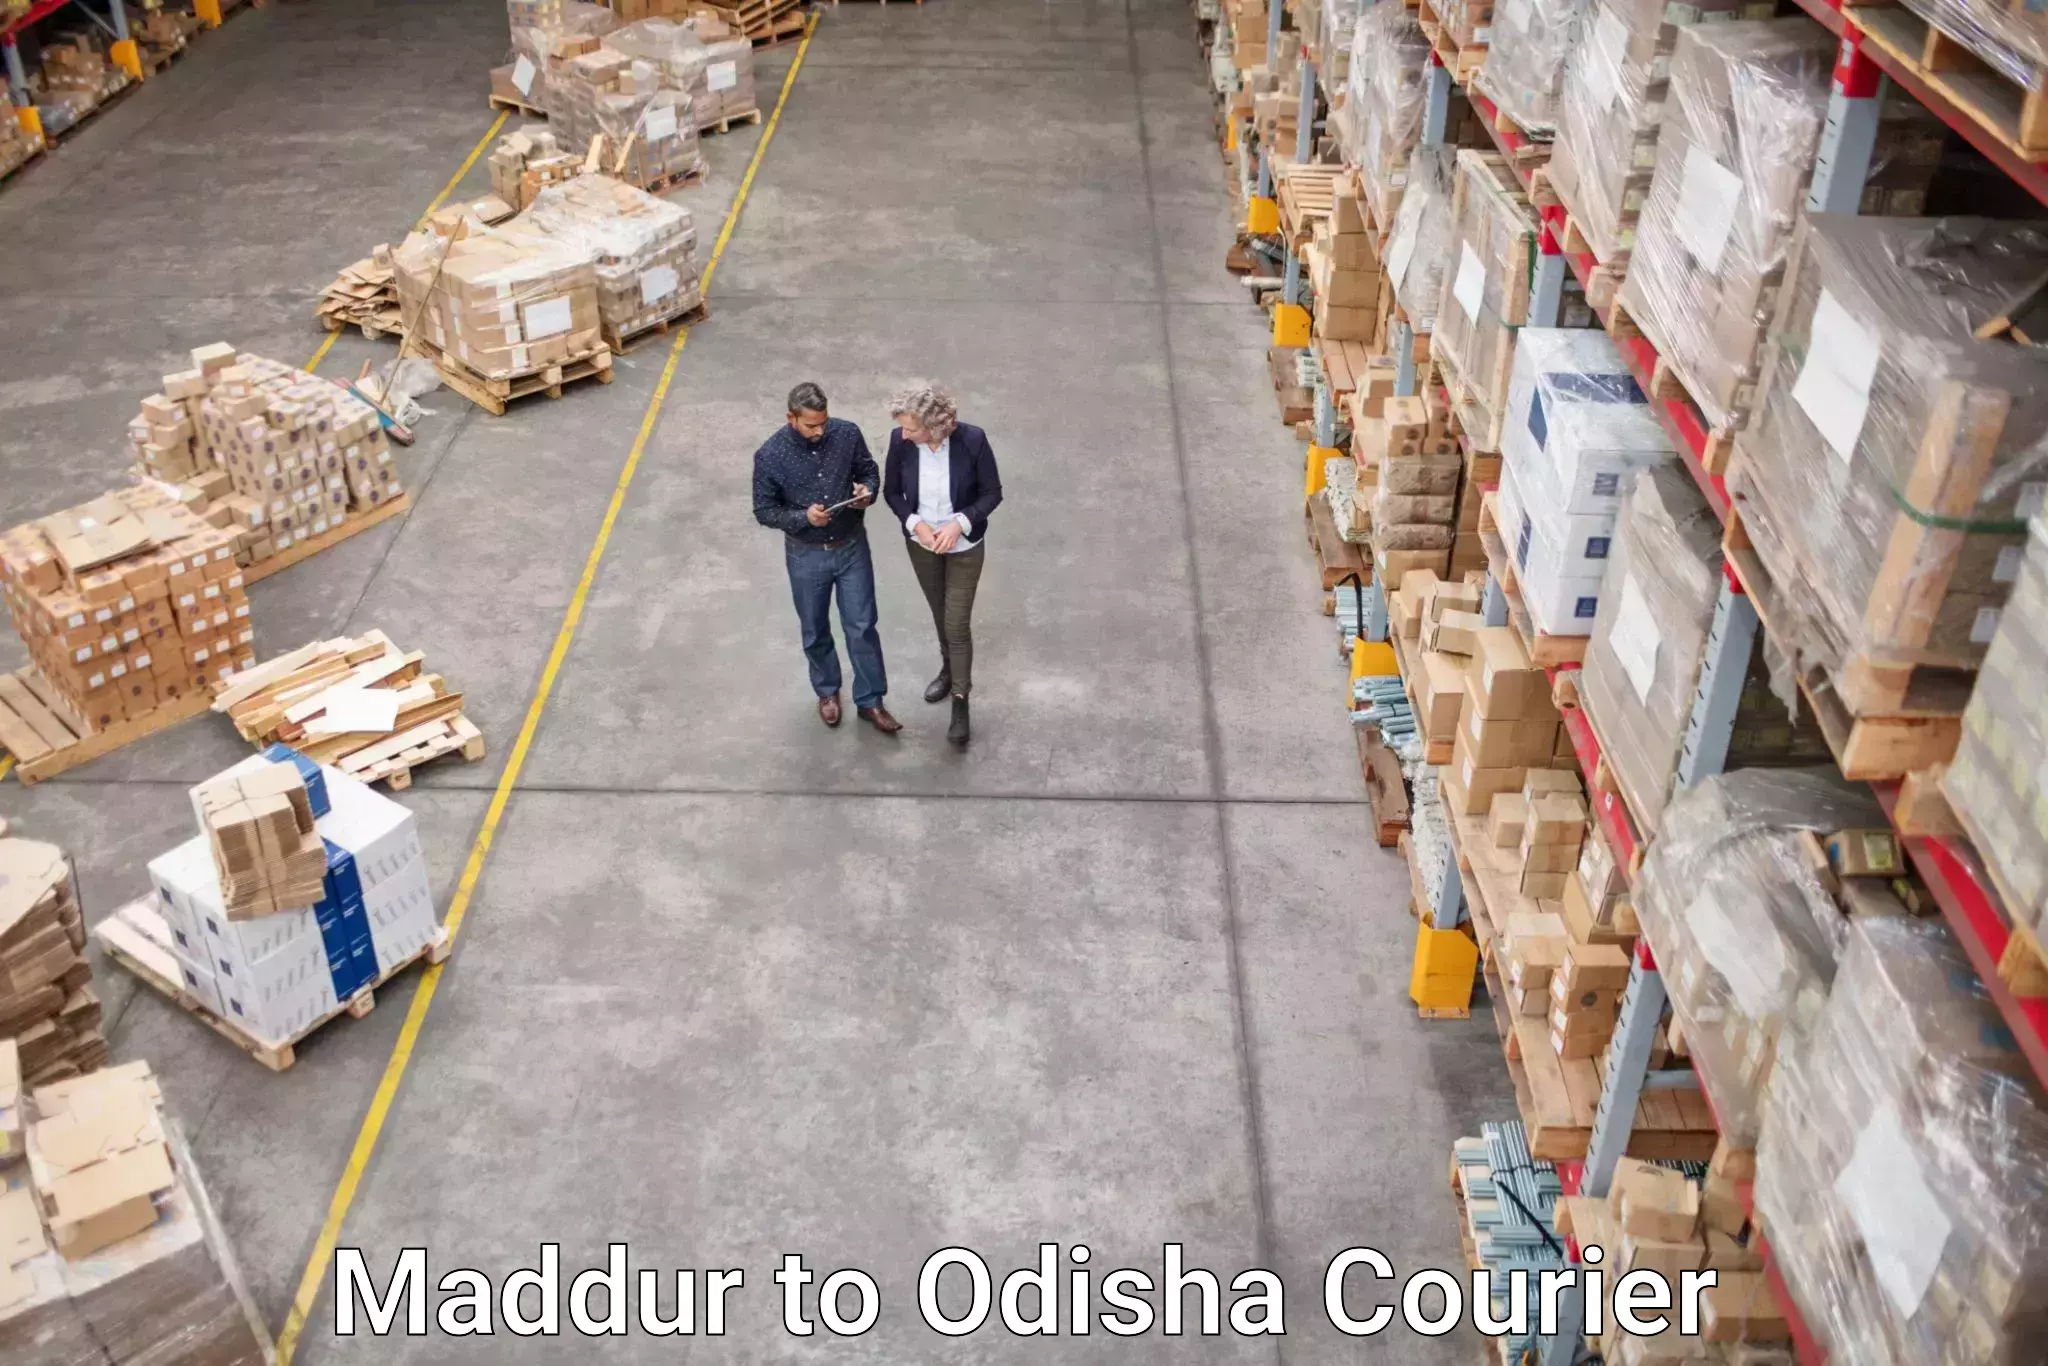 Efficient courier operations Maddur to Odisha